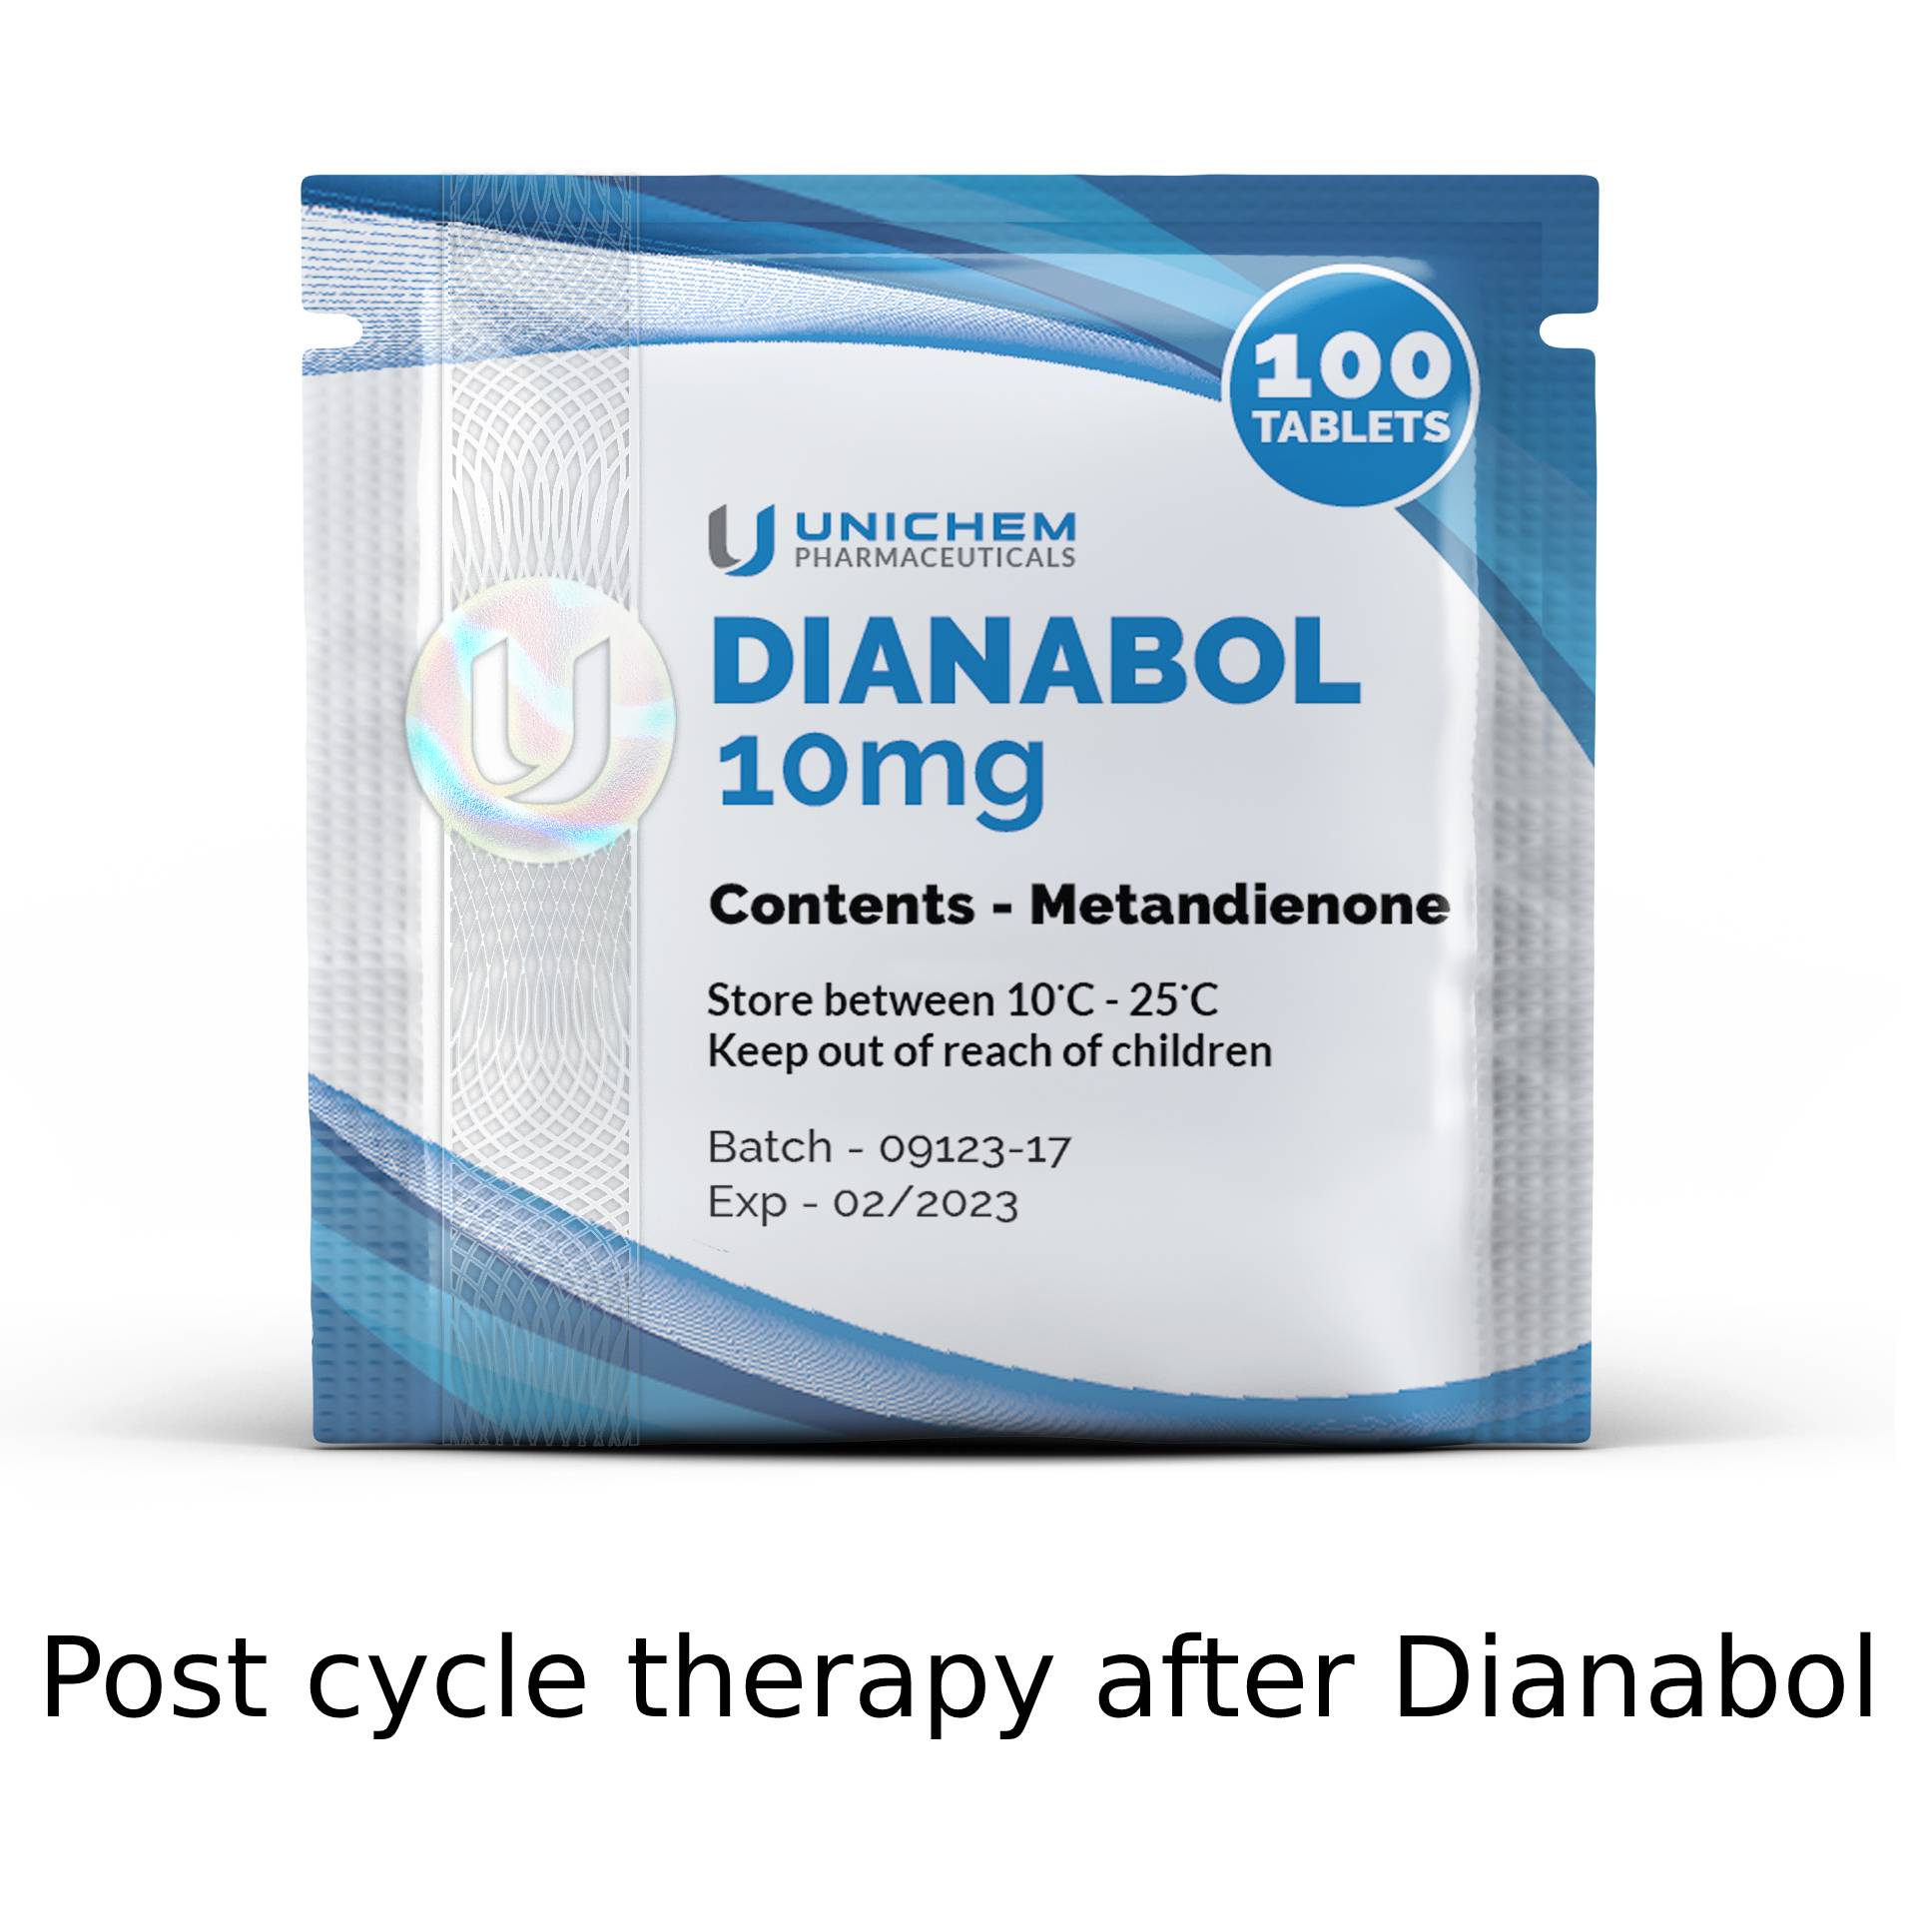 Post cycle therapy after Dianabol